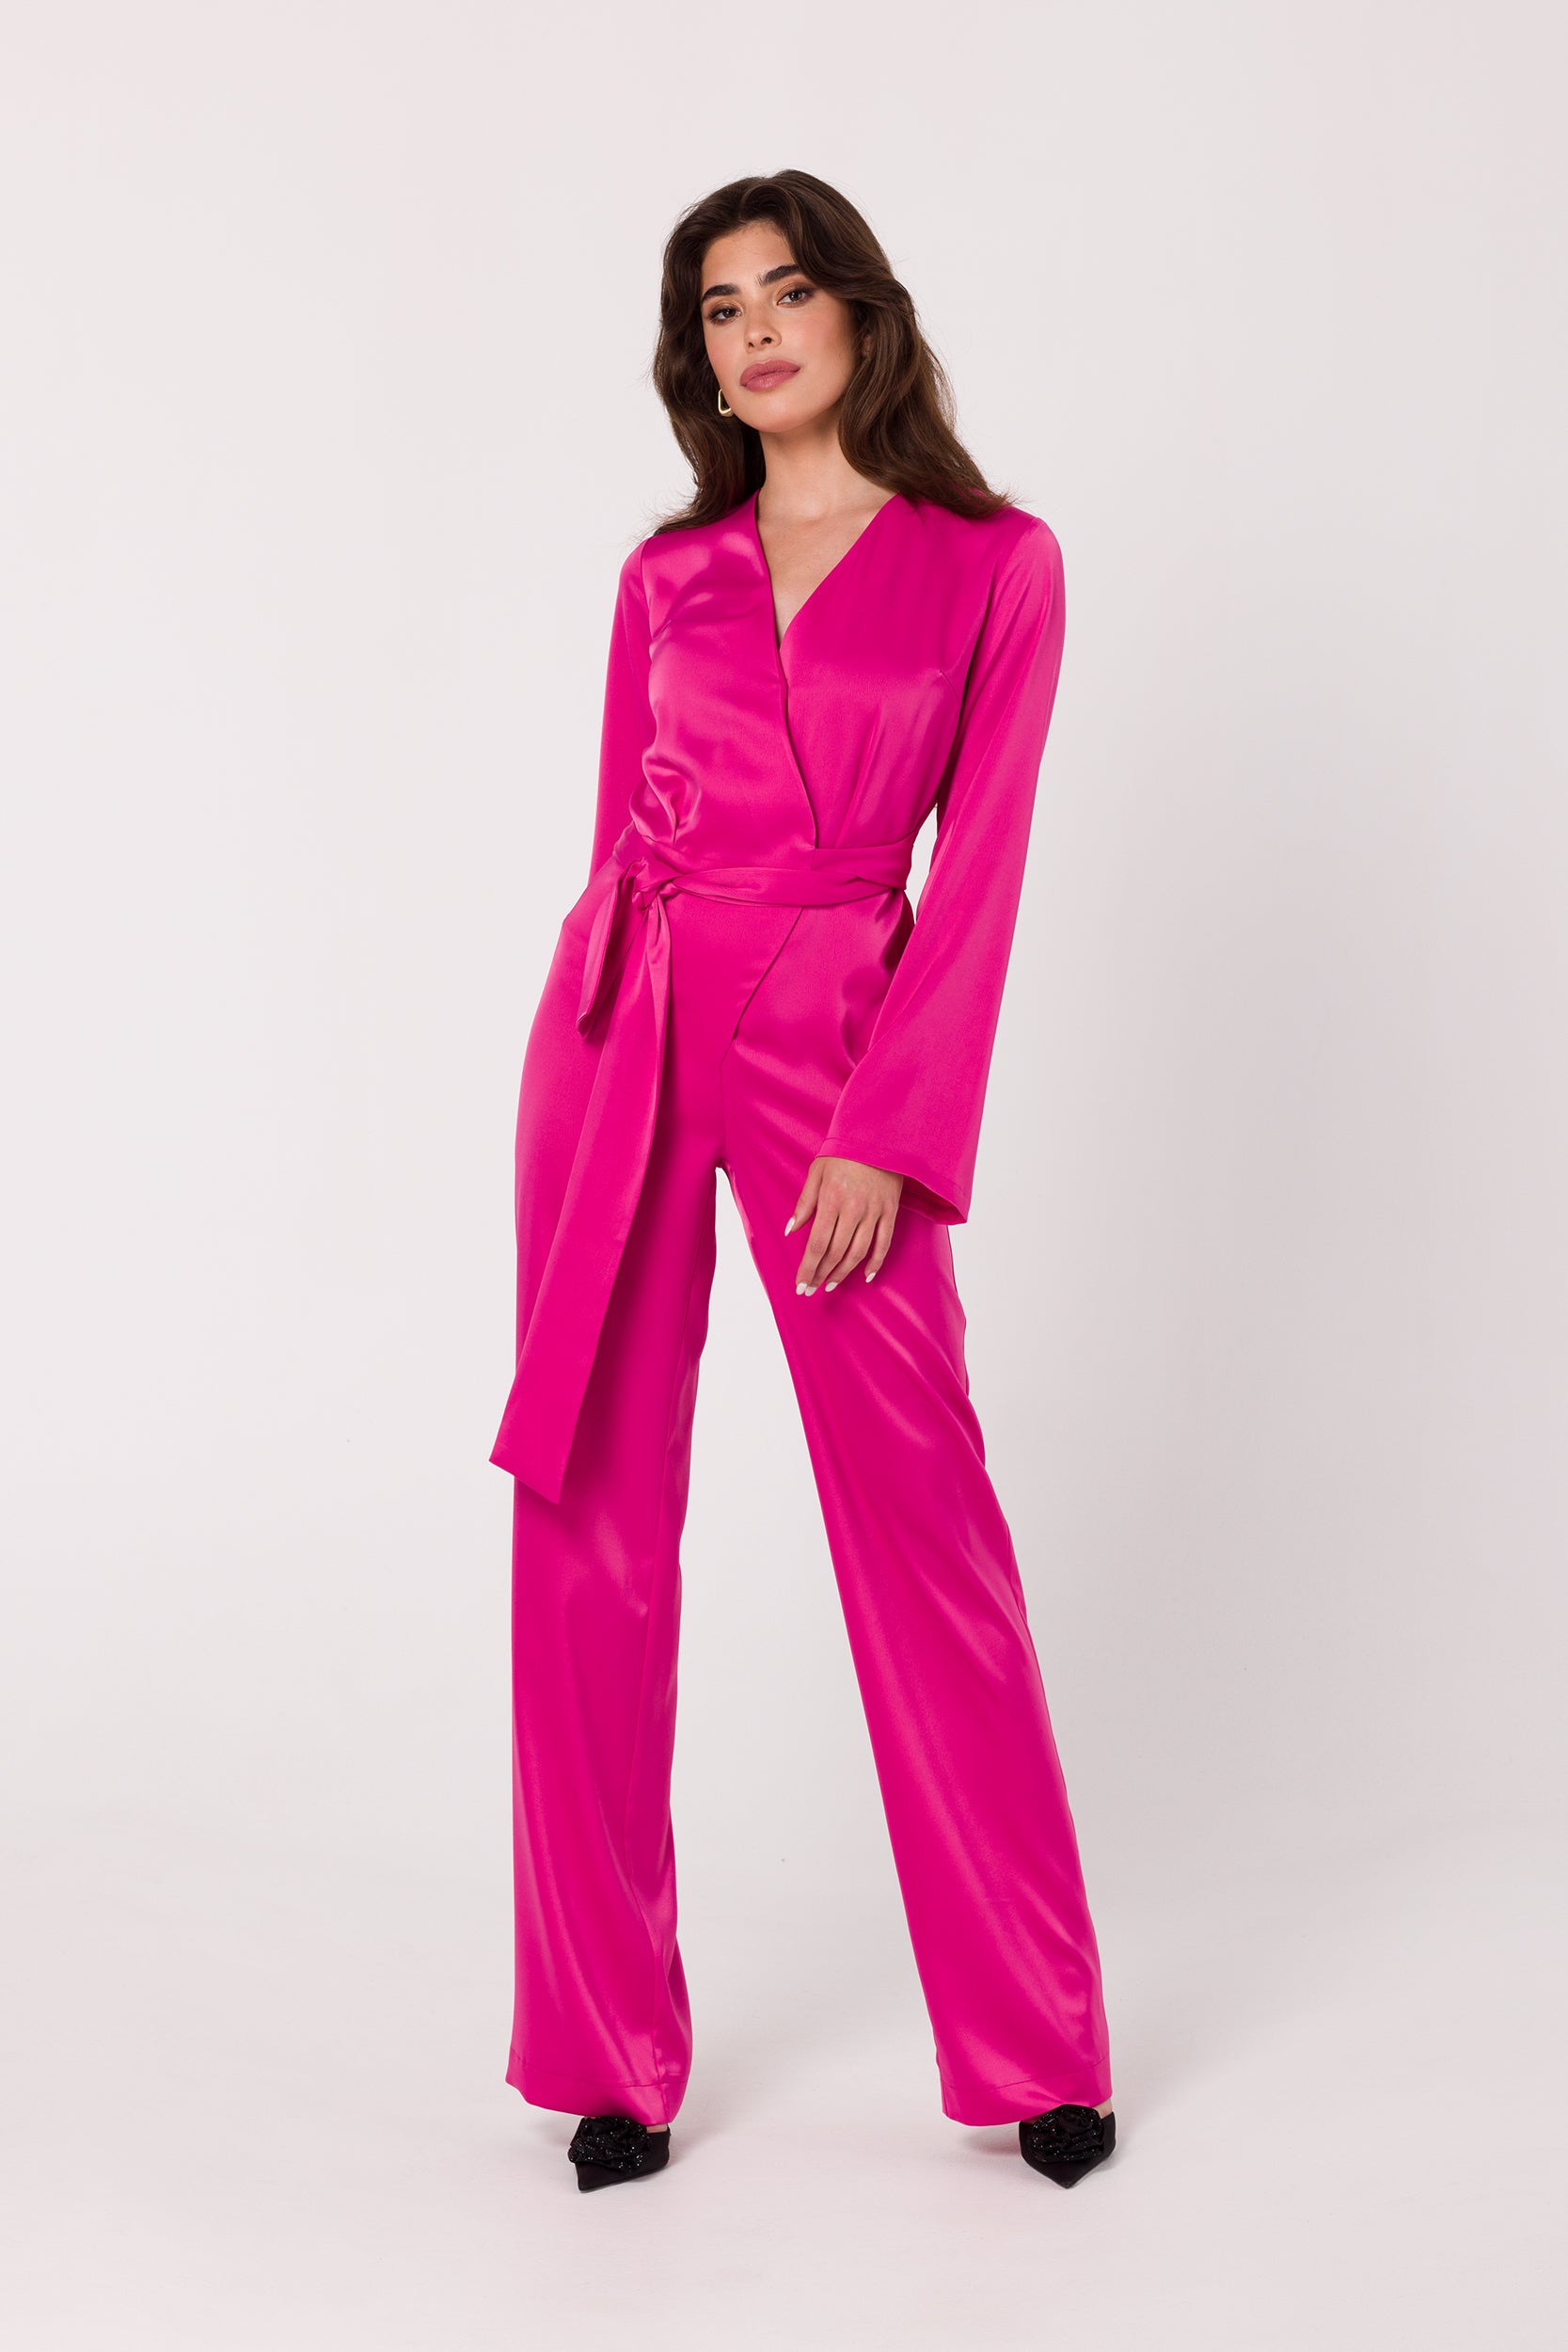 Long Sleeve Pink Satin Jumpsuit | Strictly In | Make a statement at your next event with our Long Sleeve Satin Jumpsuit. Crafted from luxurious satin, it features a V-neck, long sleeves, and a tied waist for a glamorous yet comfortable look. Perfect for the party season.